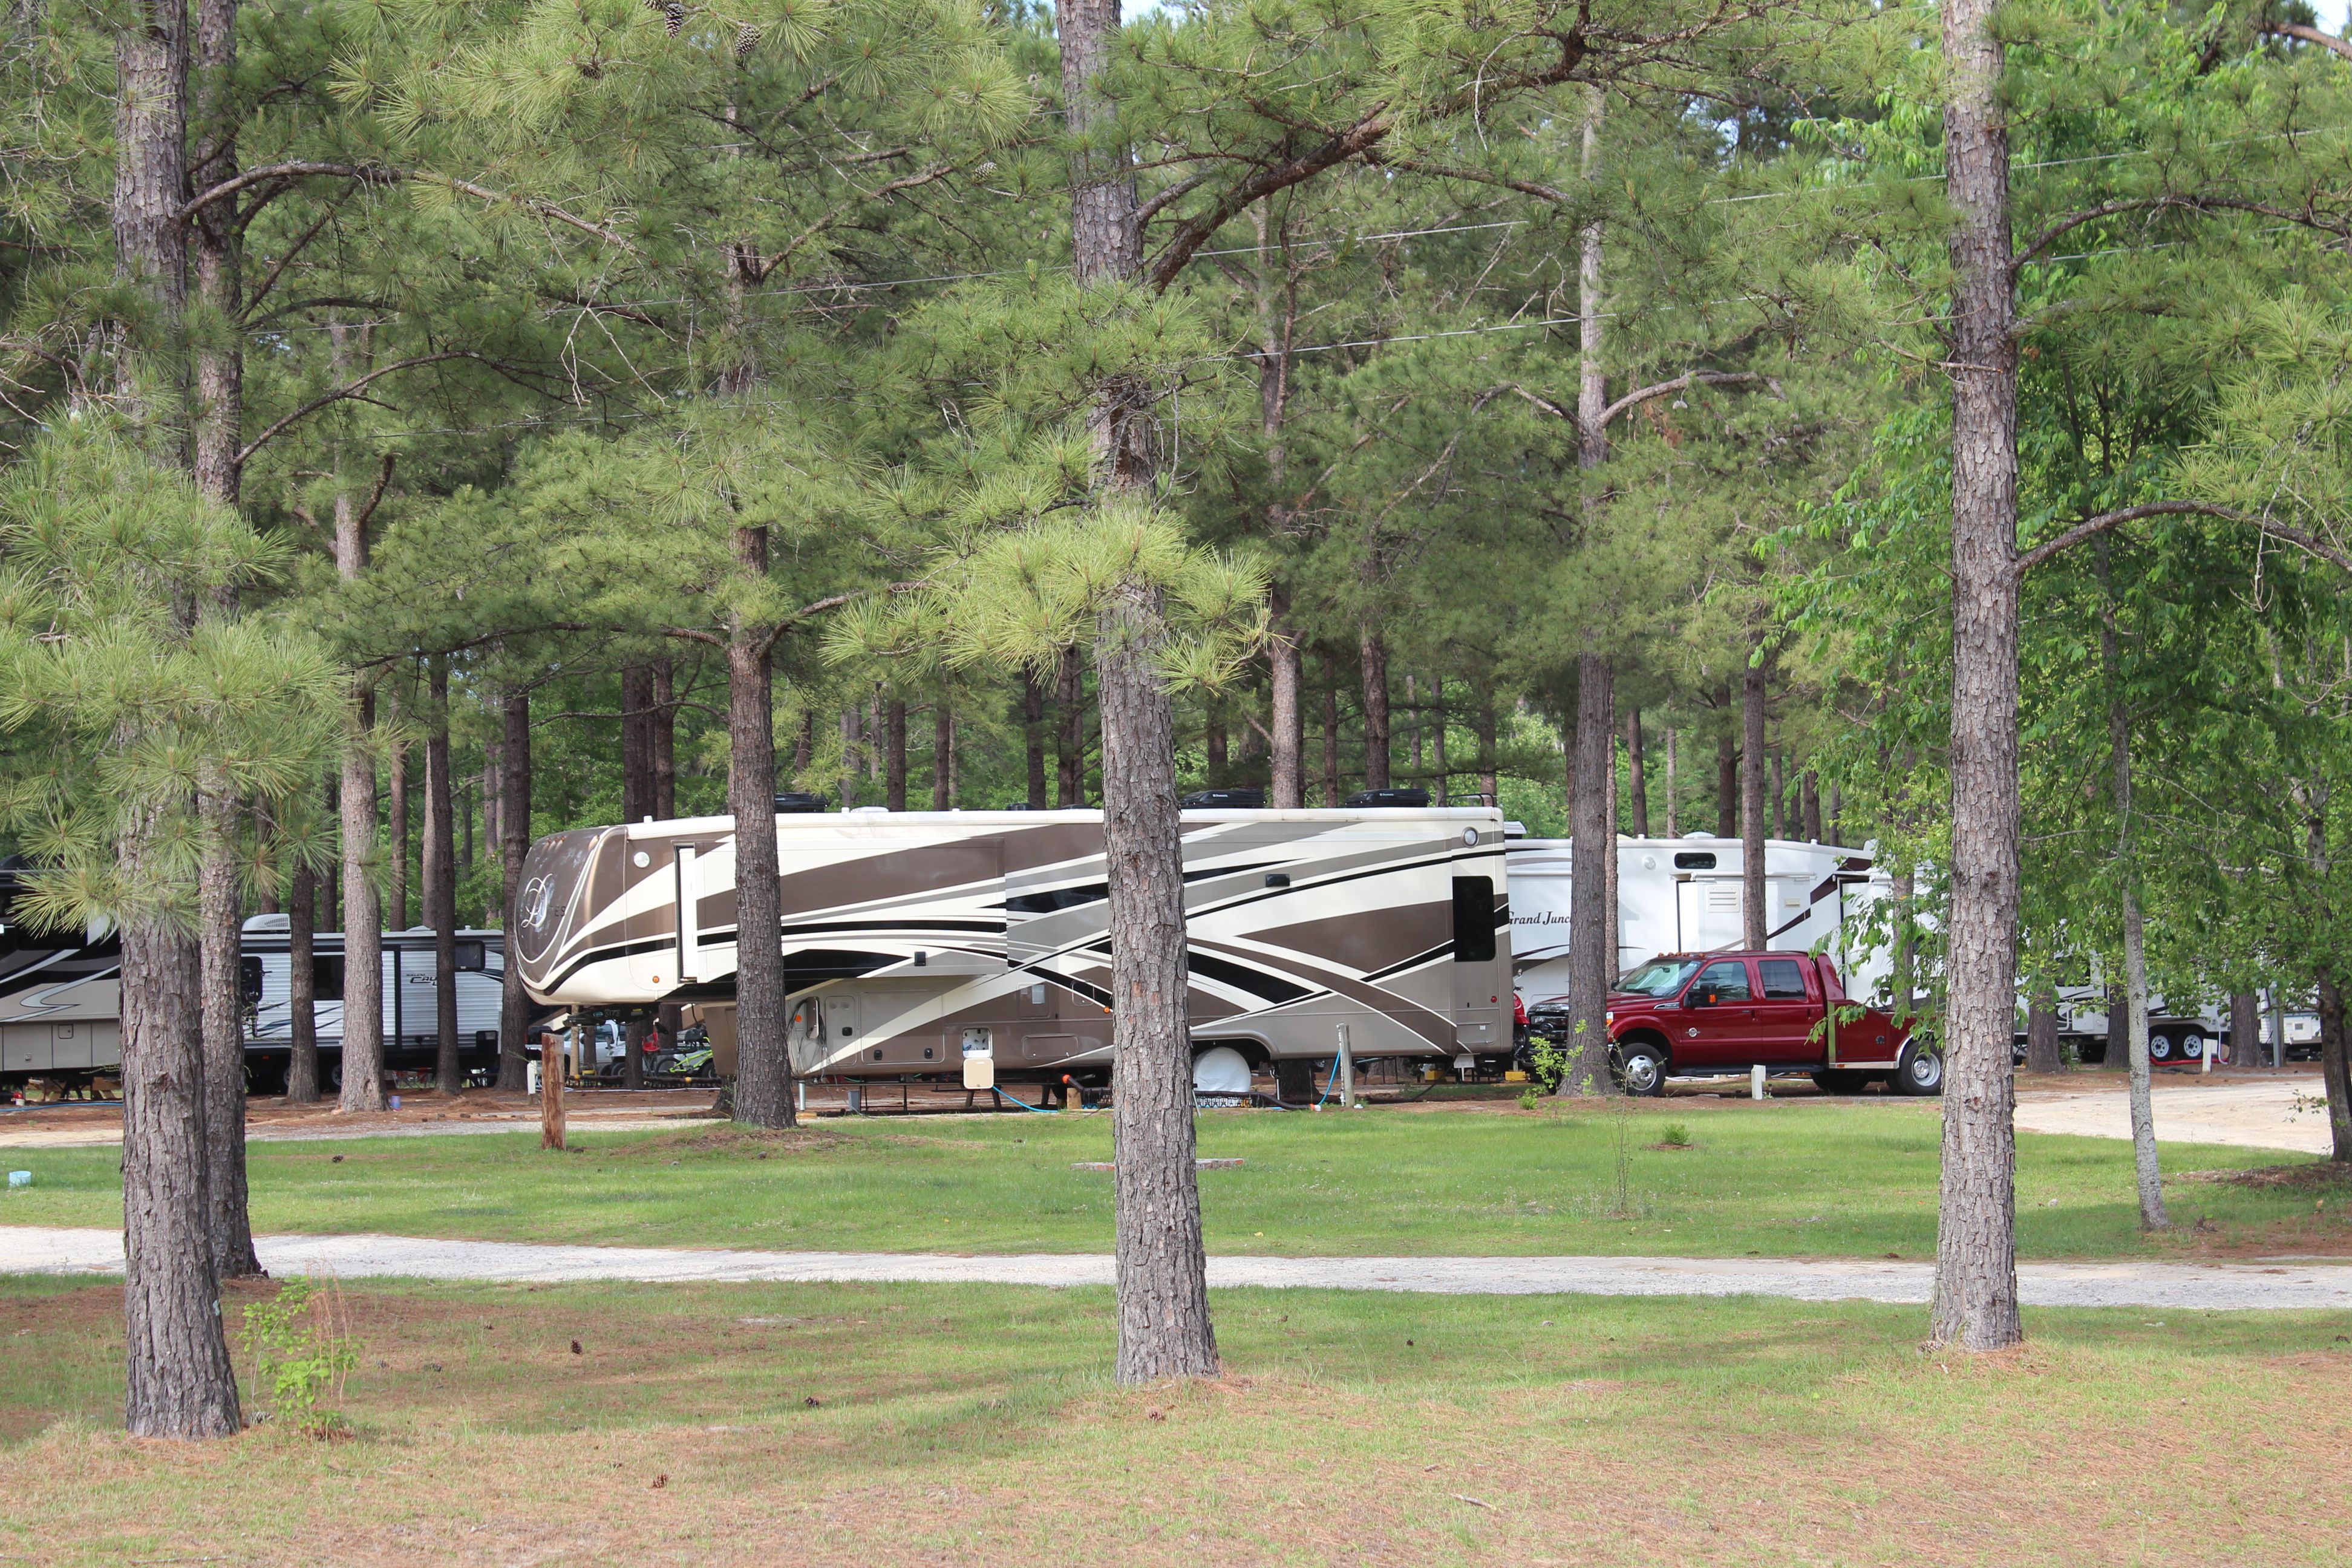 Huge RV parked on the campground - Beaver Run RV Park